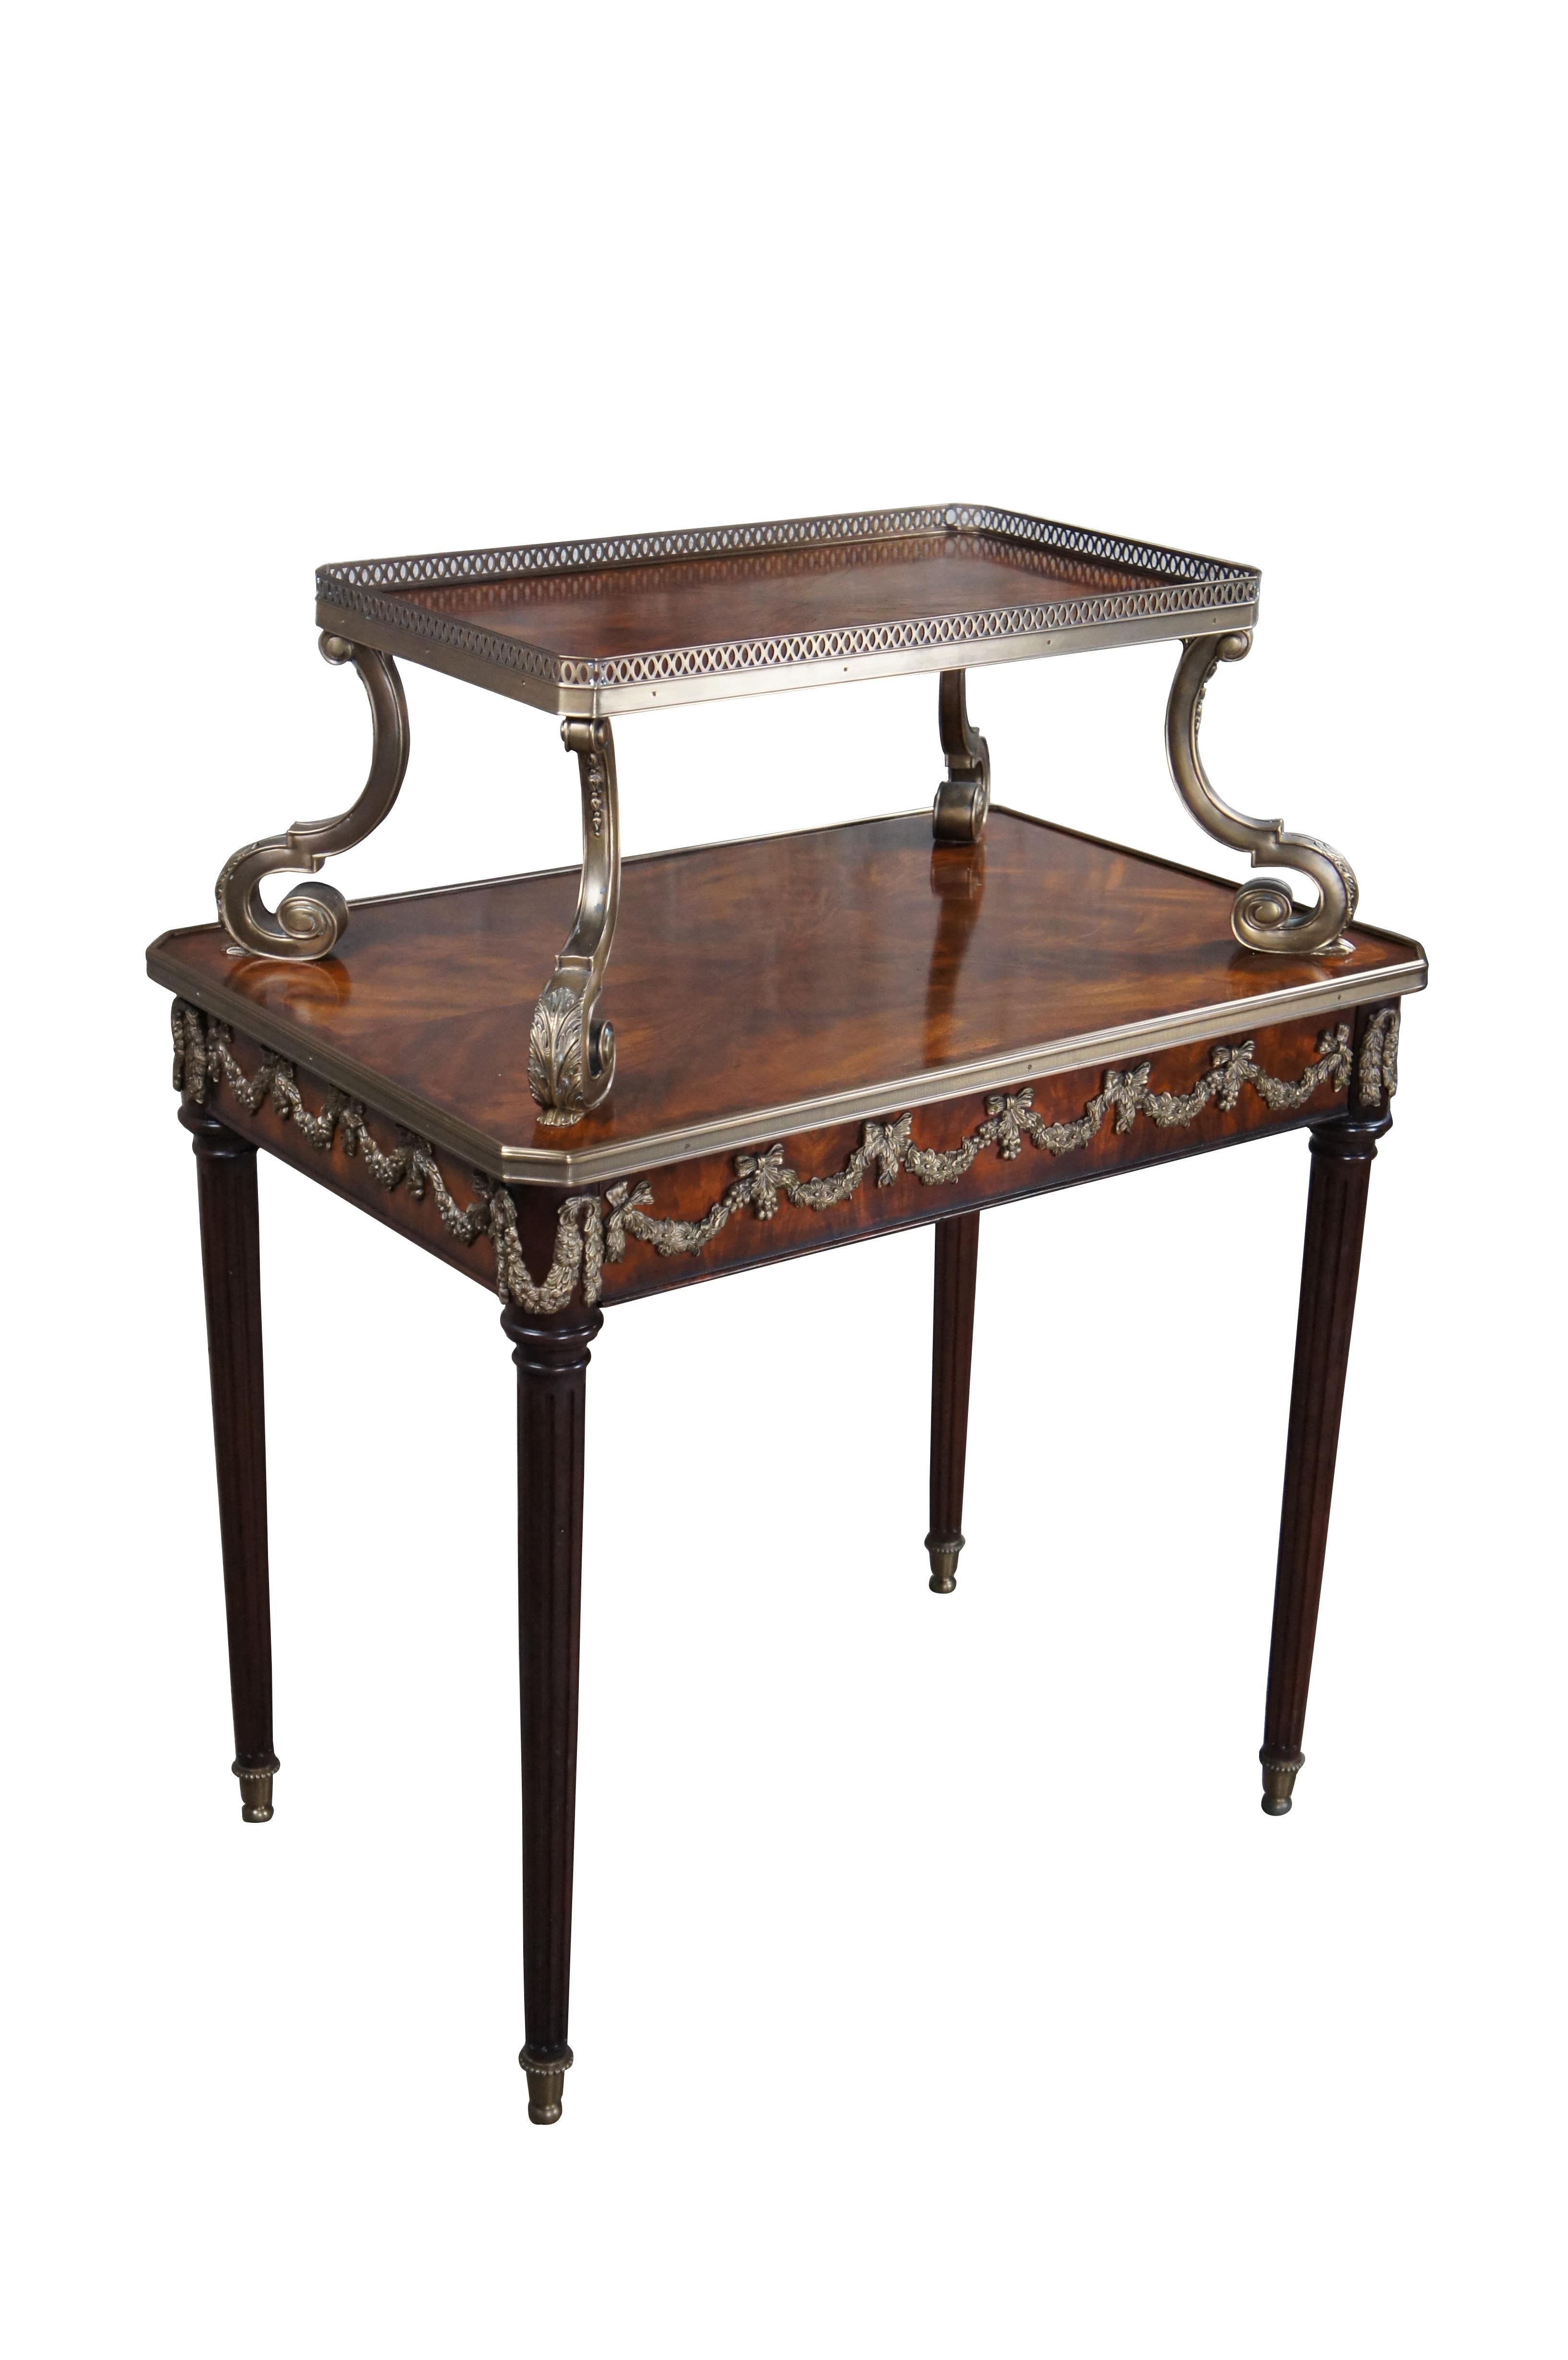 Theodore Alexander Louis XVI Two Tier Crotch Mahogany Display Tea Serving Table In Good Condition For Sale In Dayton, OH